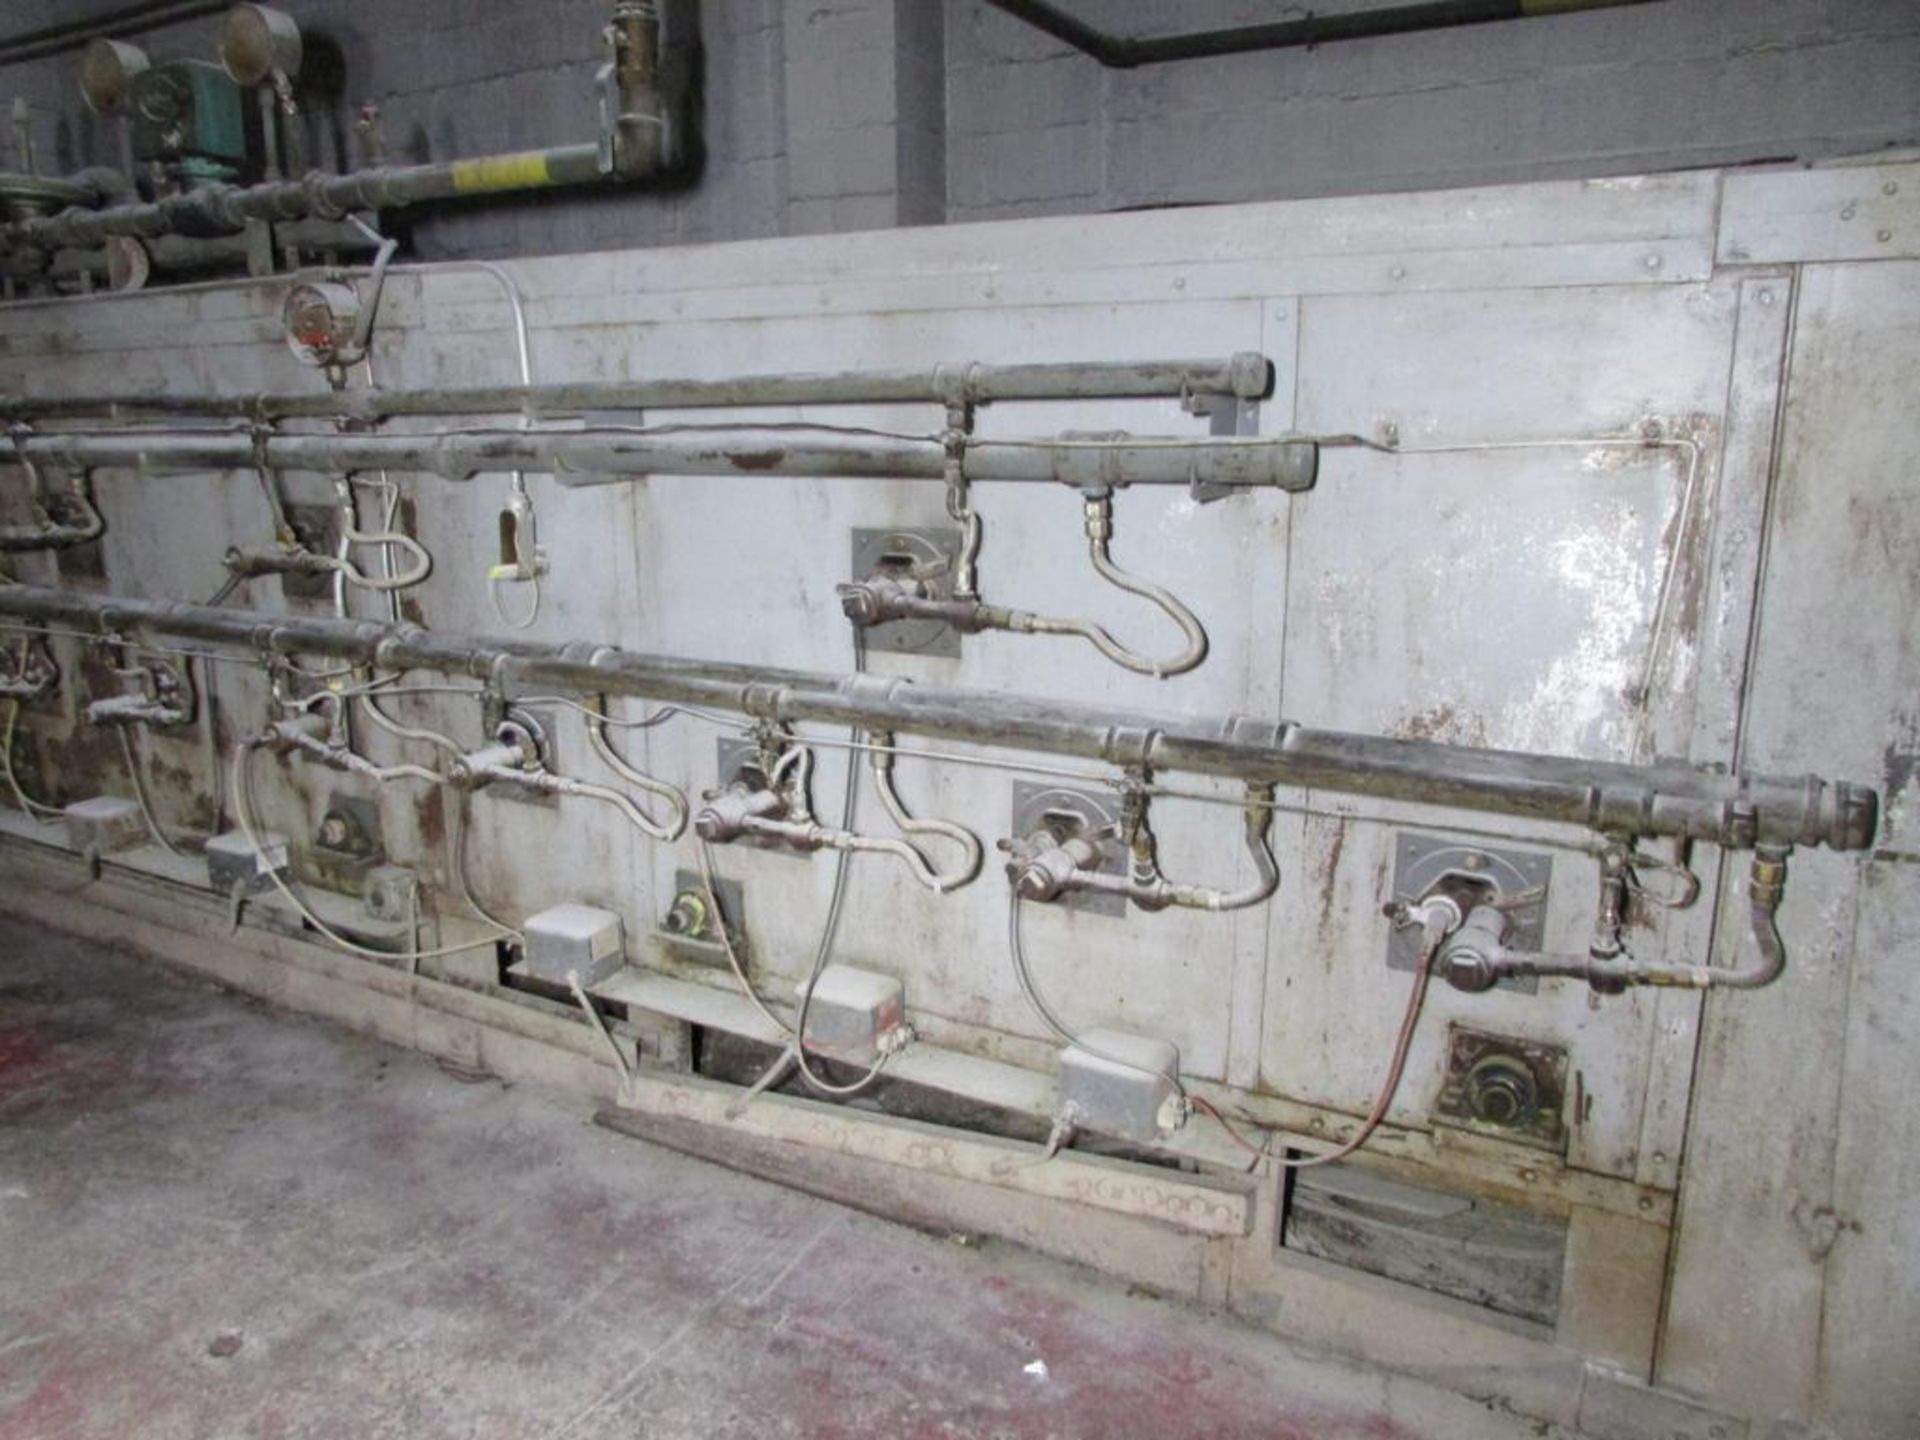 Universal 50'x3' Natural Gas Conveyor Tunnel Oven - Image 4 of 17